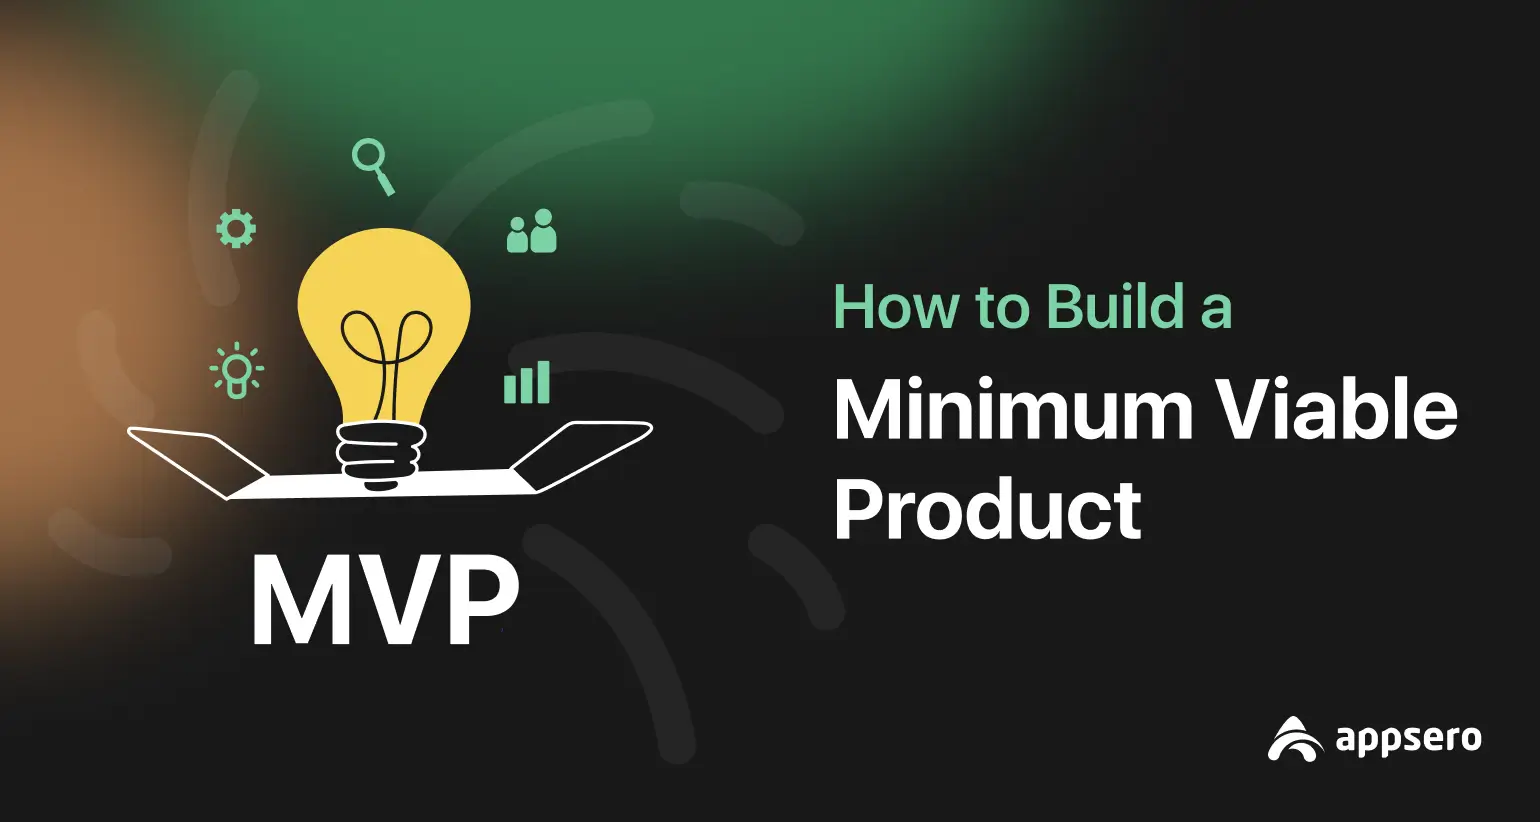 How to Build a Minimum Viable Product (MVP) Successfully